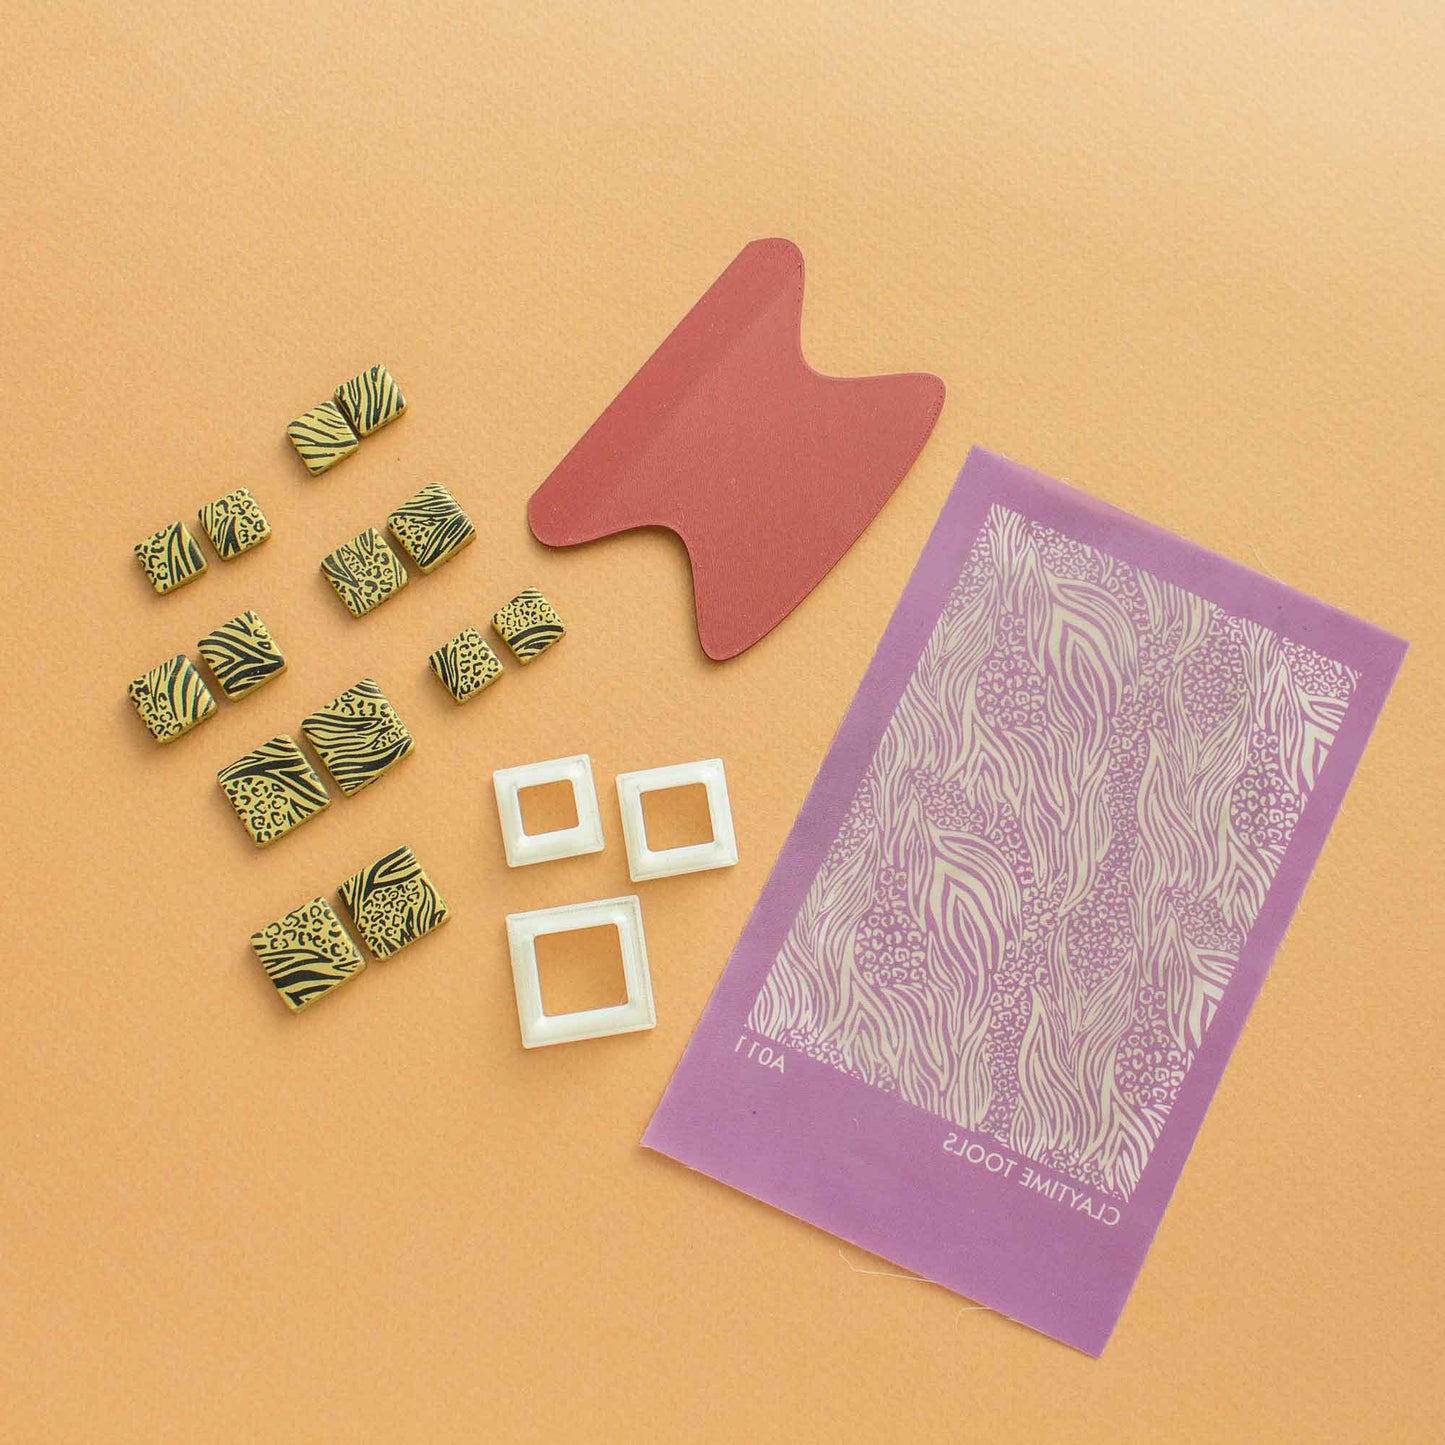 upped view of 1 Animal pattern small silkscreen, some square animal printed polymer clay shapes, 3 square cutters for clay and one squeegee on a light brown background